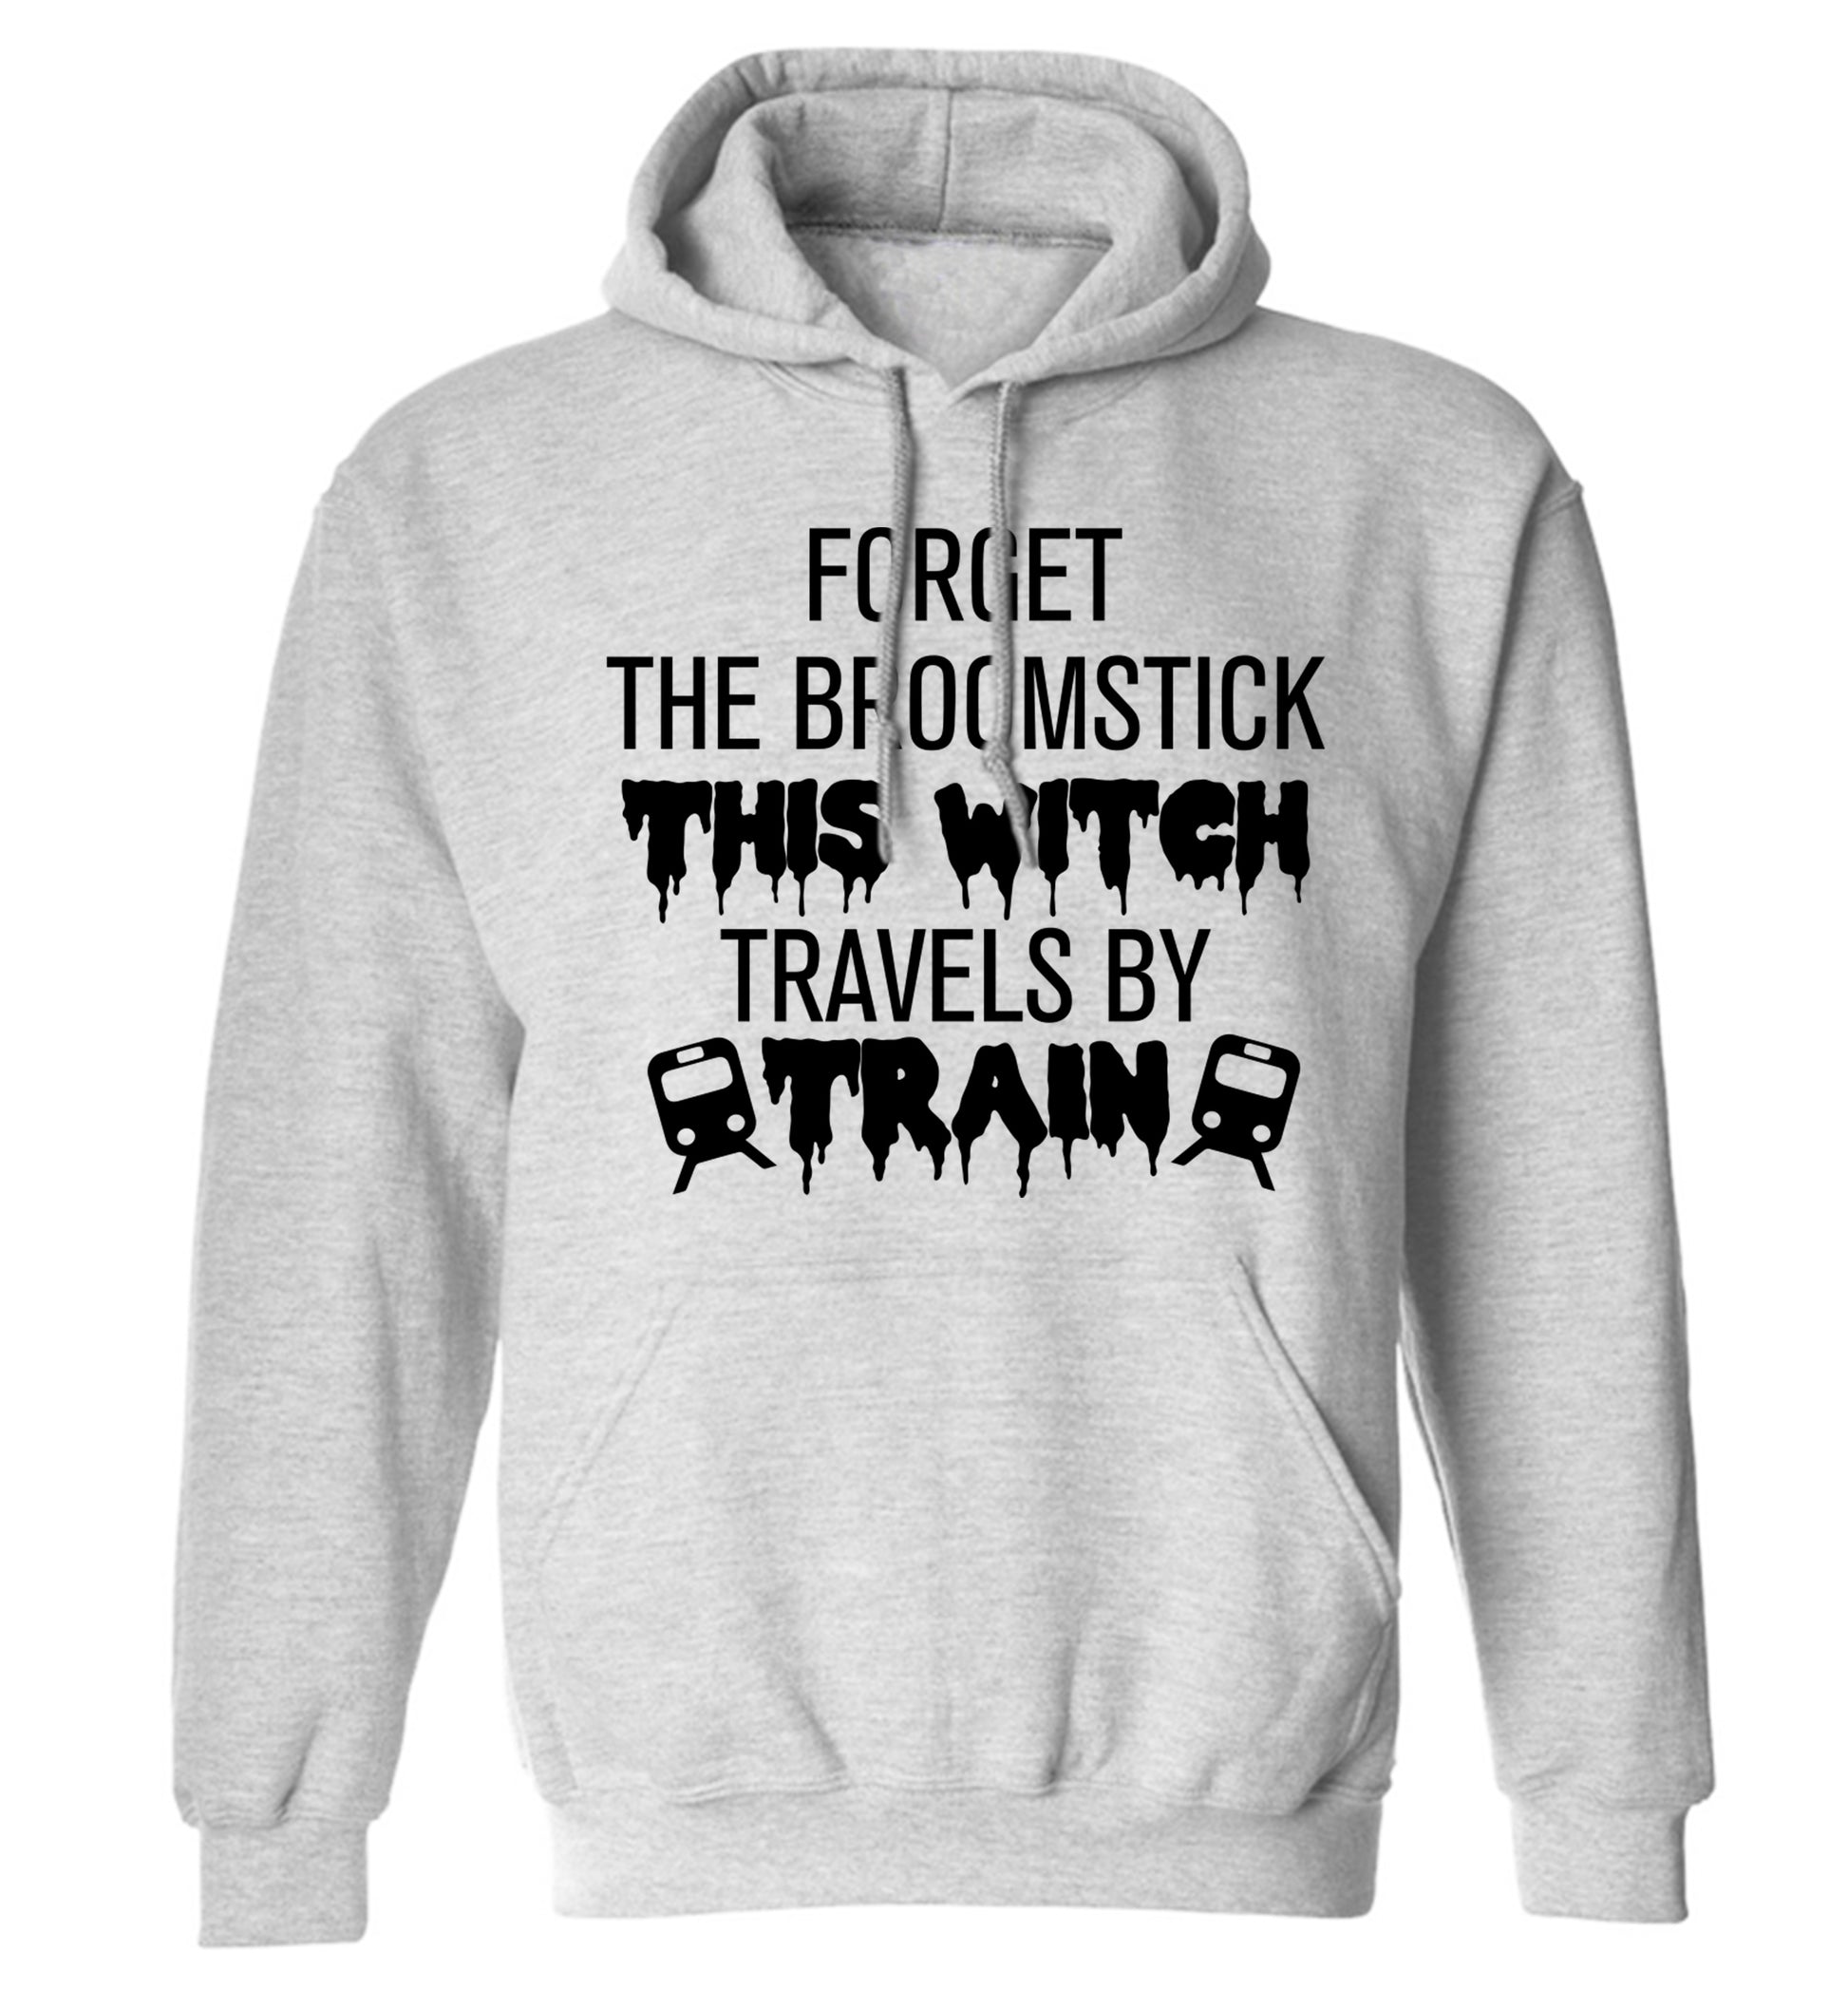 Forget the broomstick this witch travels by train adults unisexgrey hoodie 2XL